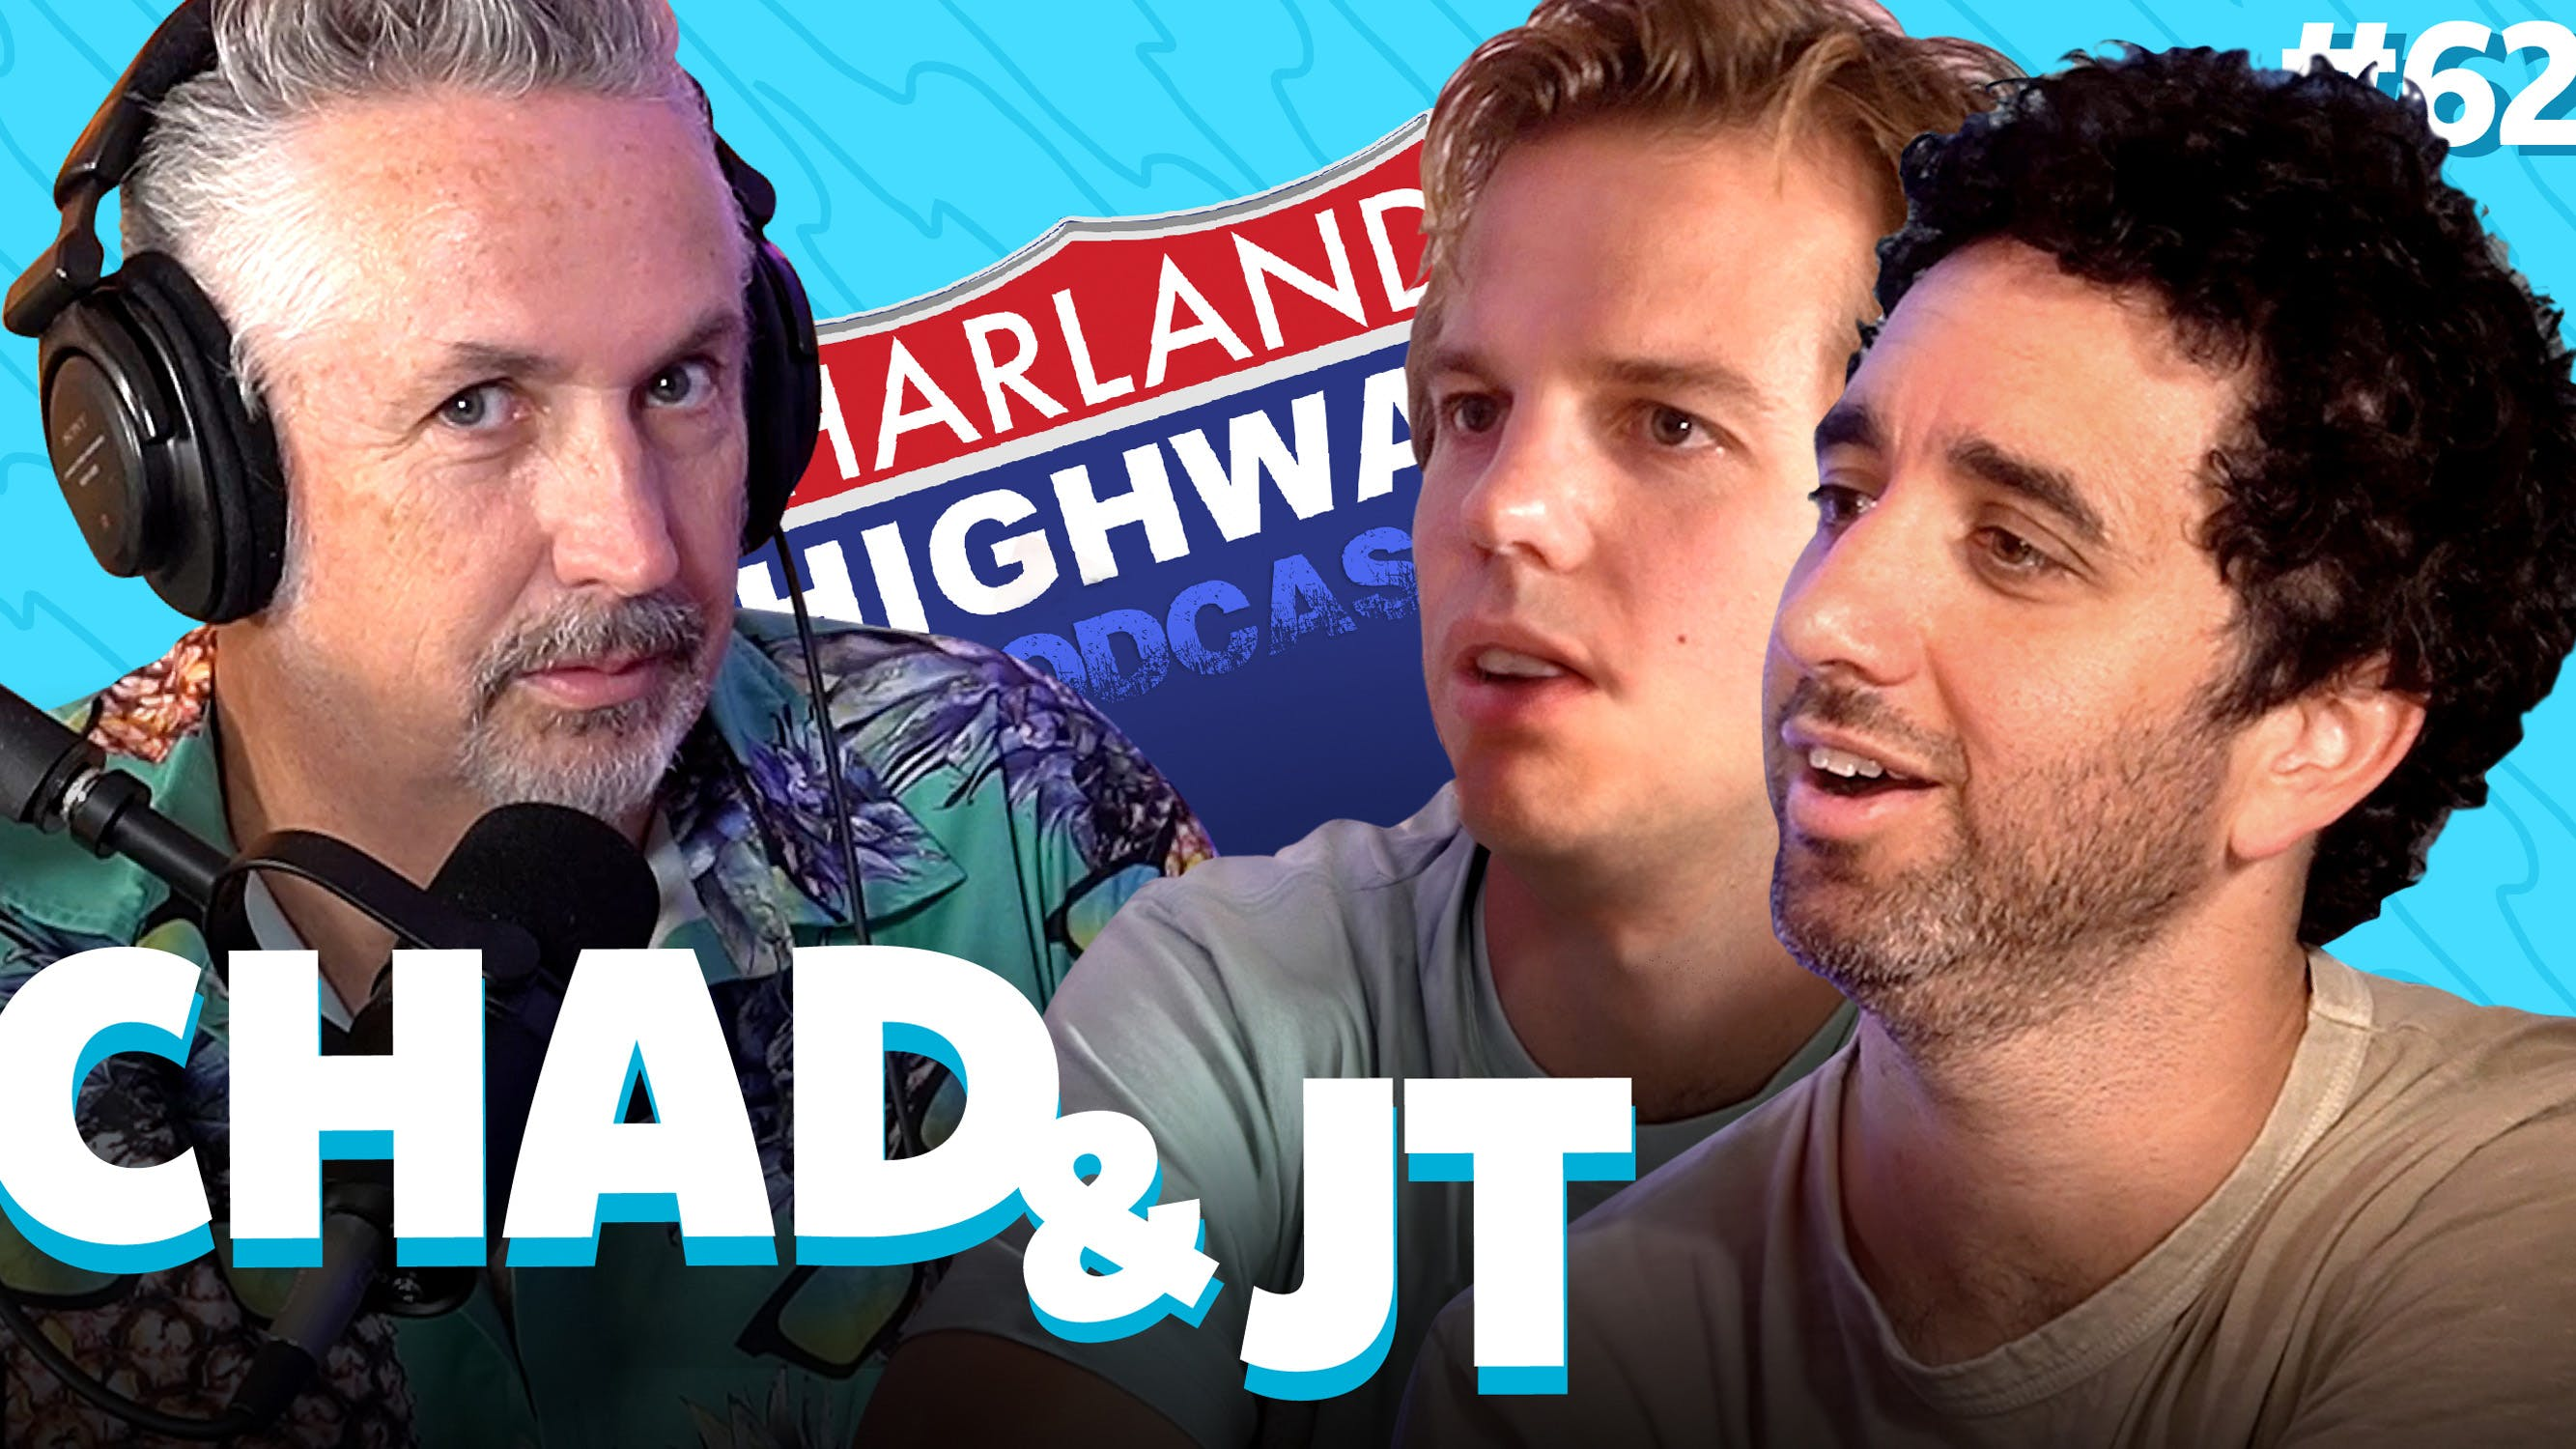 NEW HARLAND HIGHWAY #62 - CHAD & JT, Comedians, Actors, Podcasters, Activists.